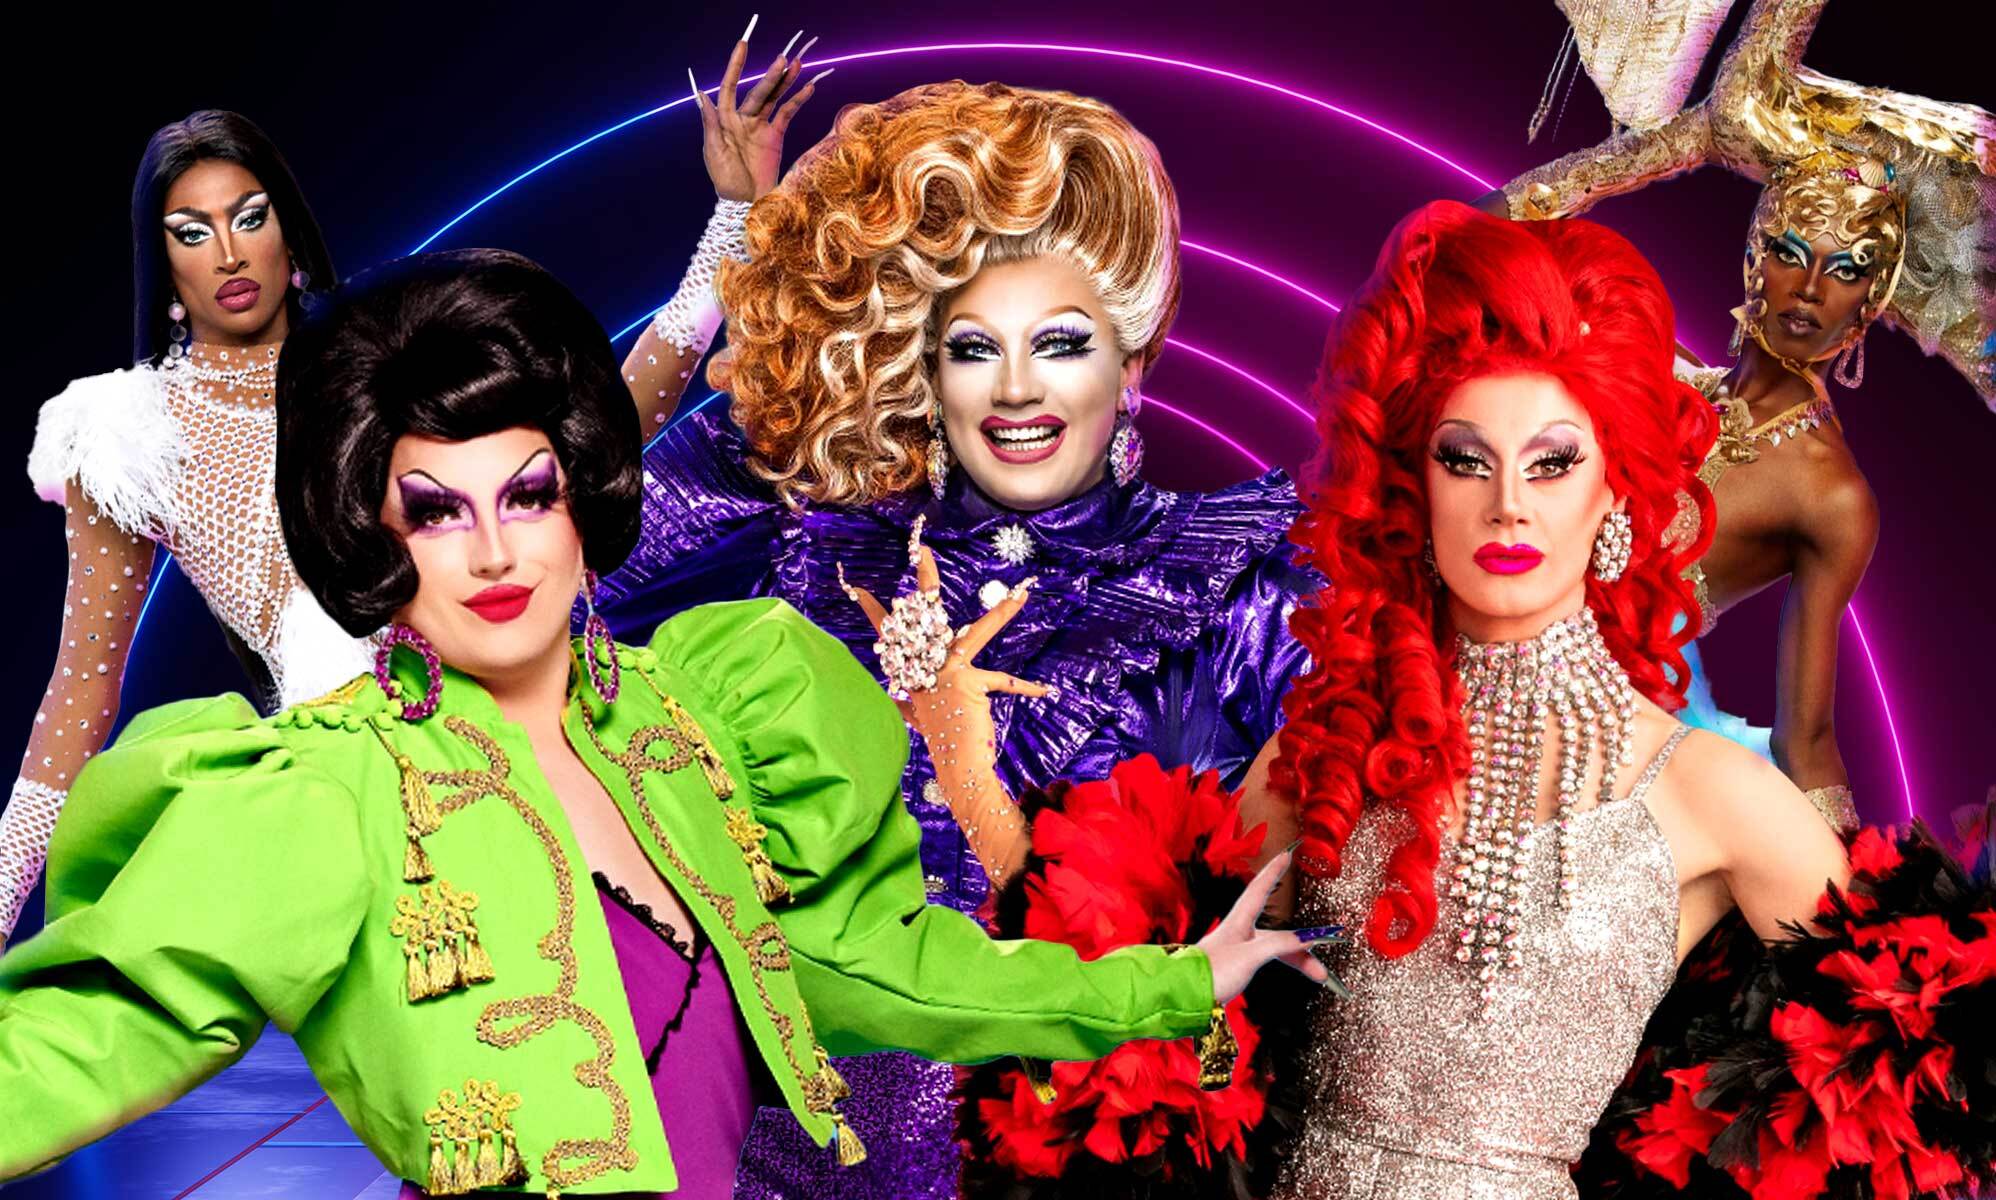 The best moments from the RuPaul's Drag Race UK premiere